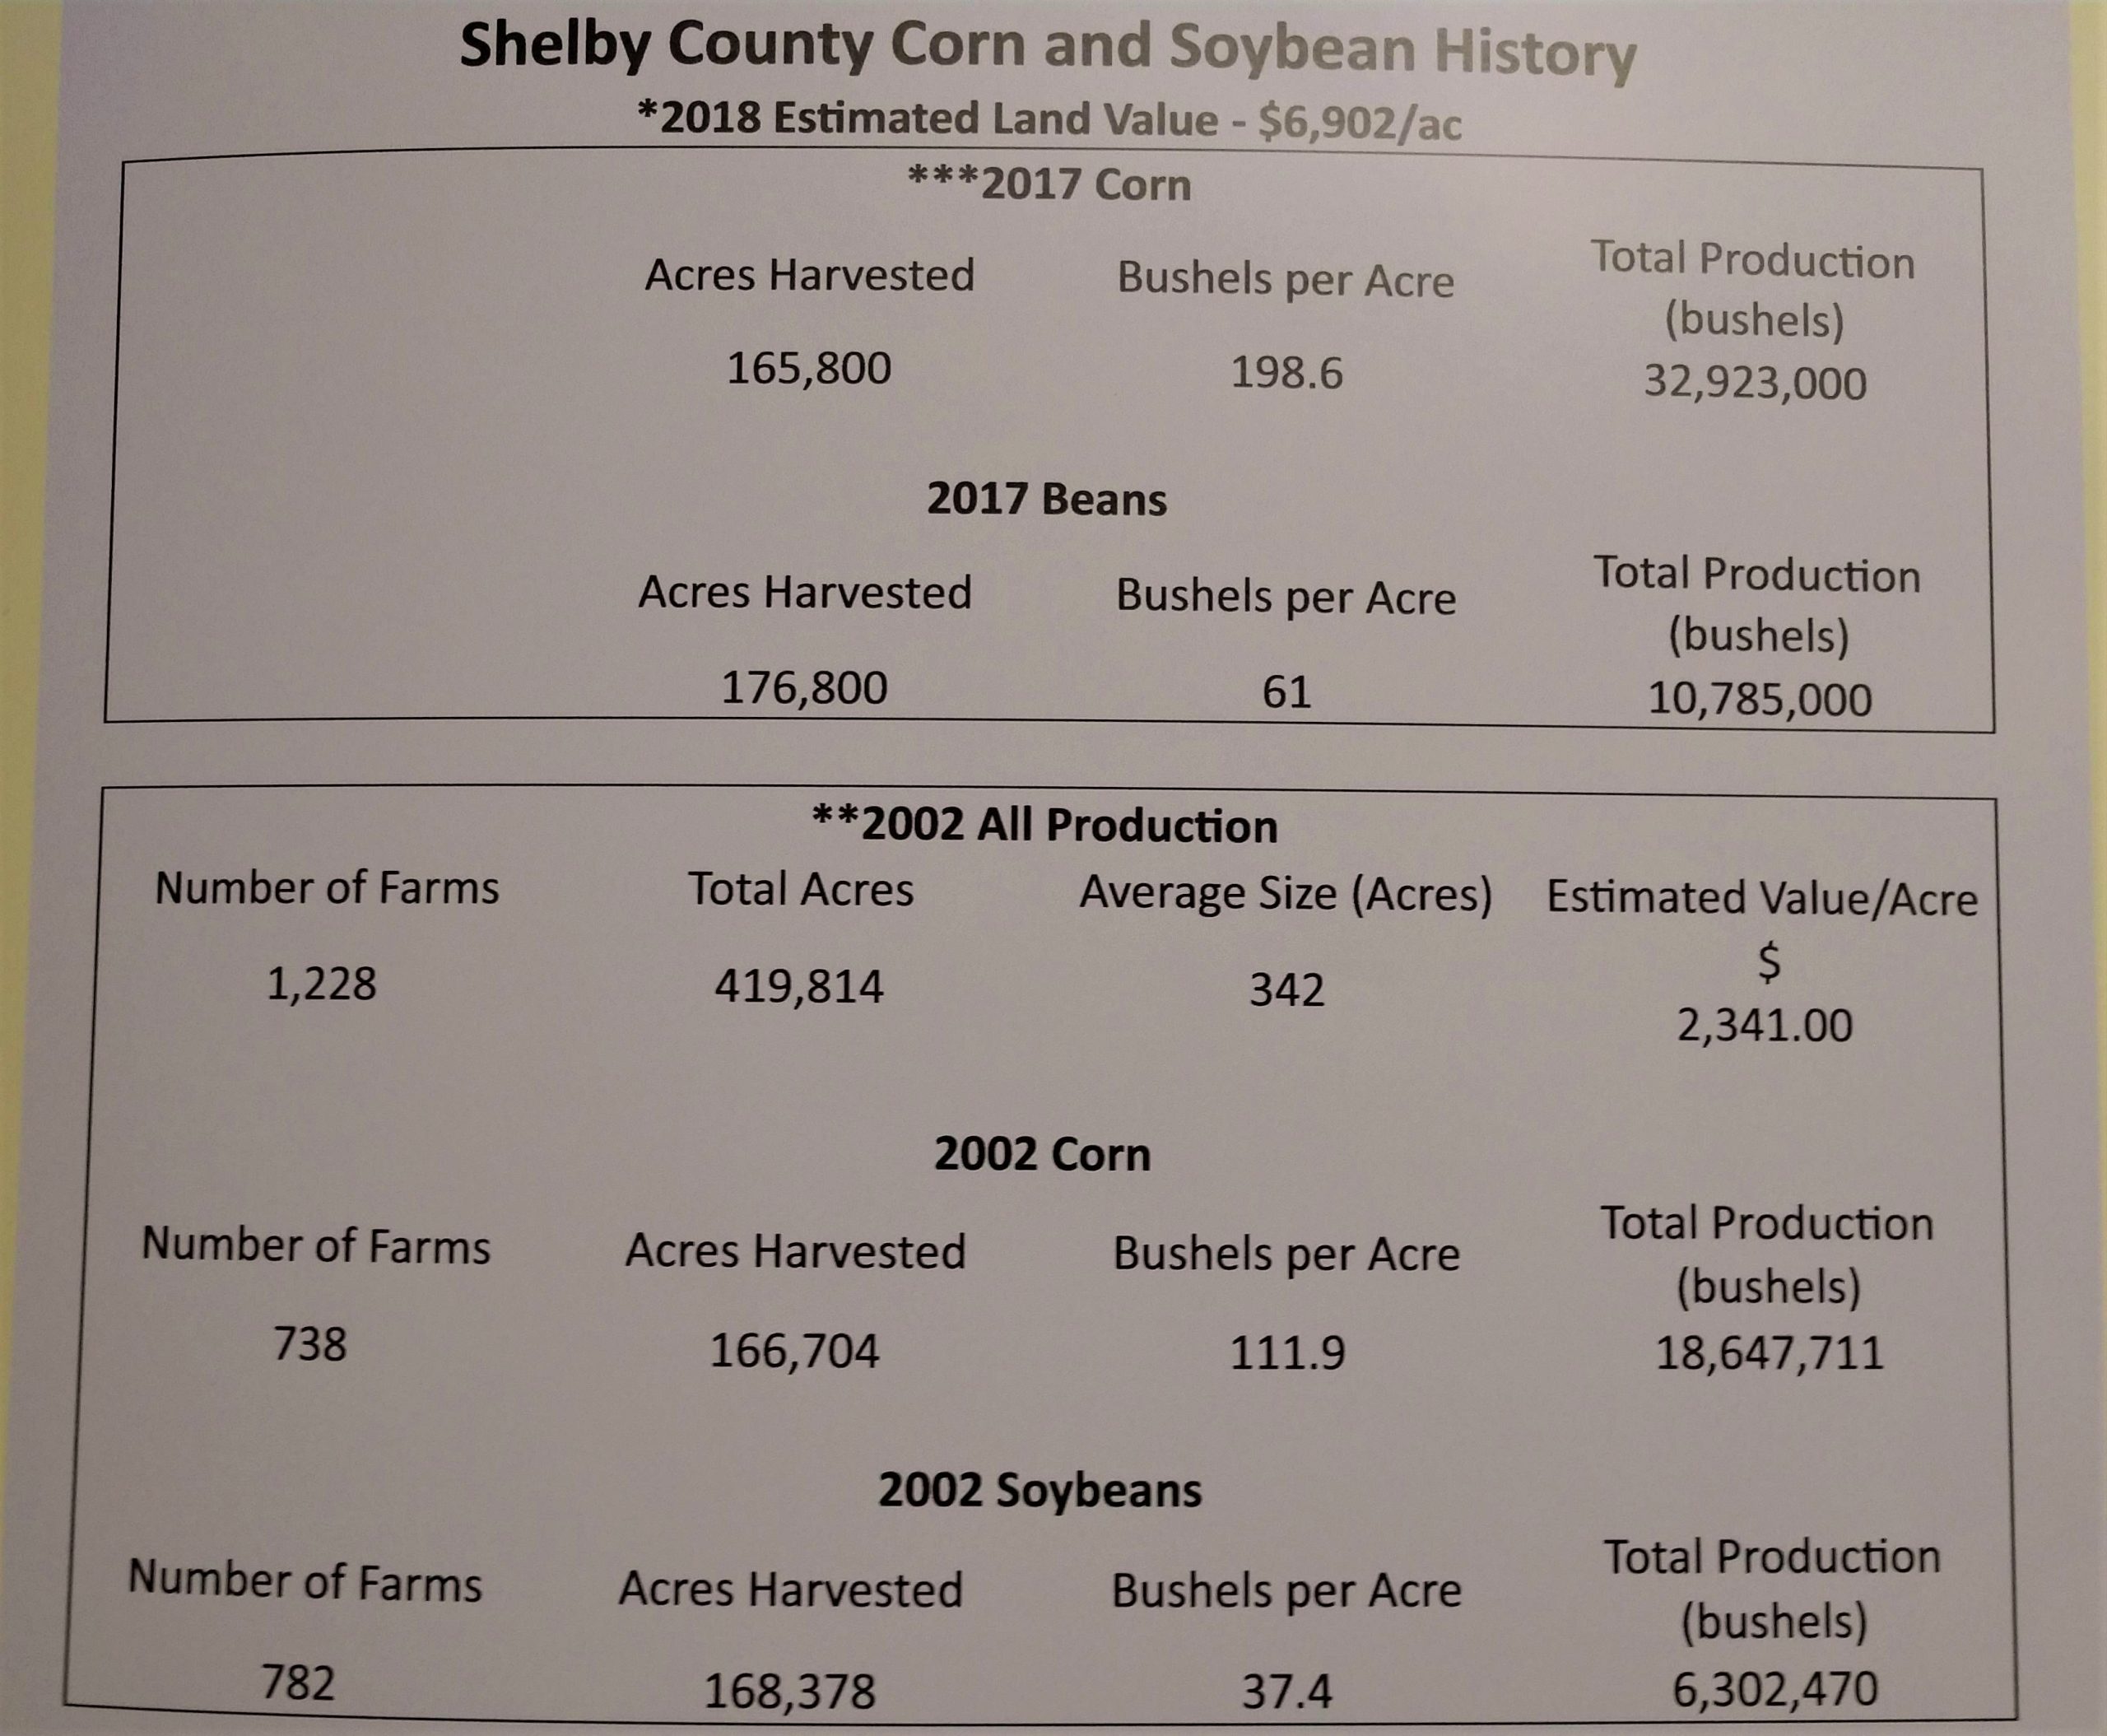 Photograph of part of Lake Shelbyville's companion exhibition featuring agricultural statistics from Shelby County.